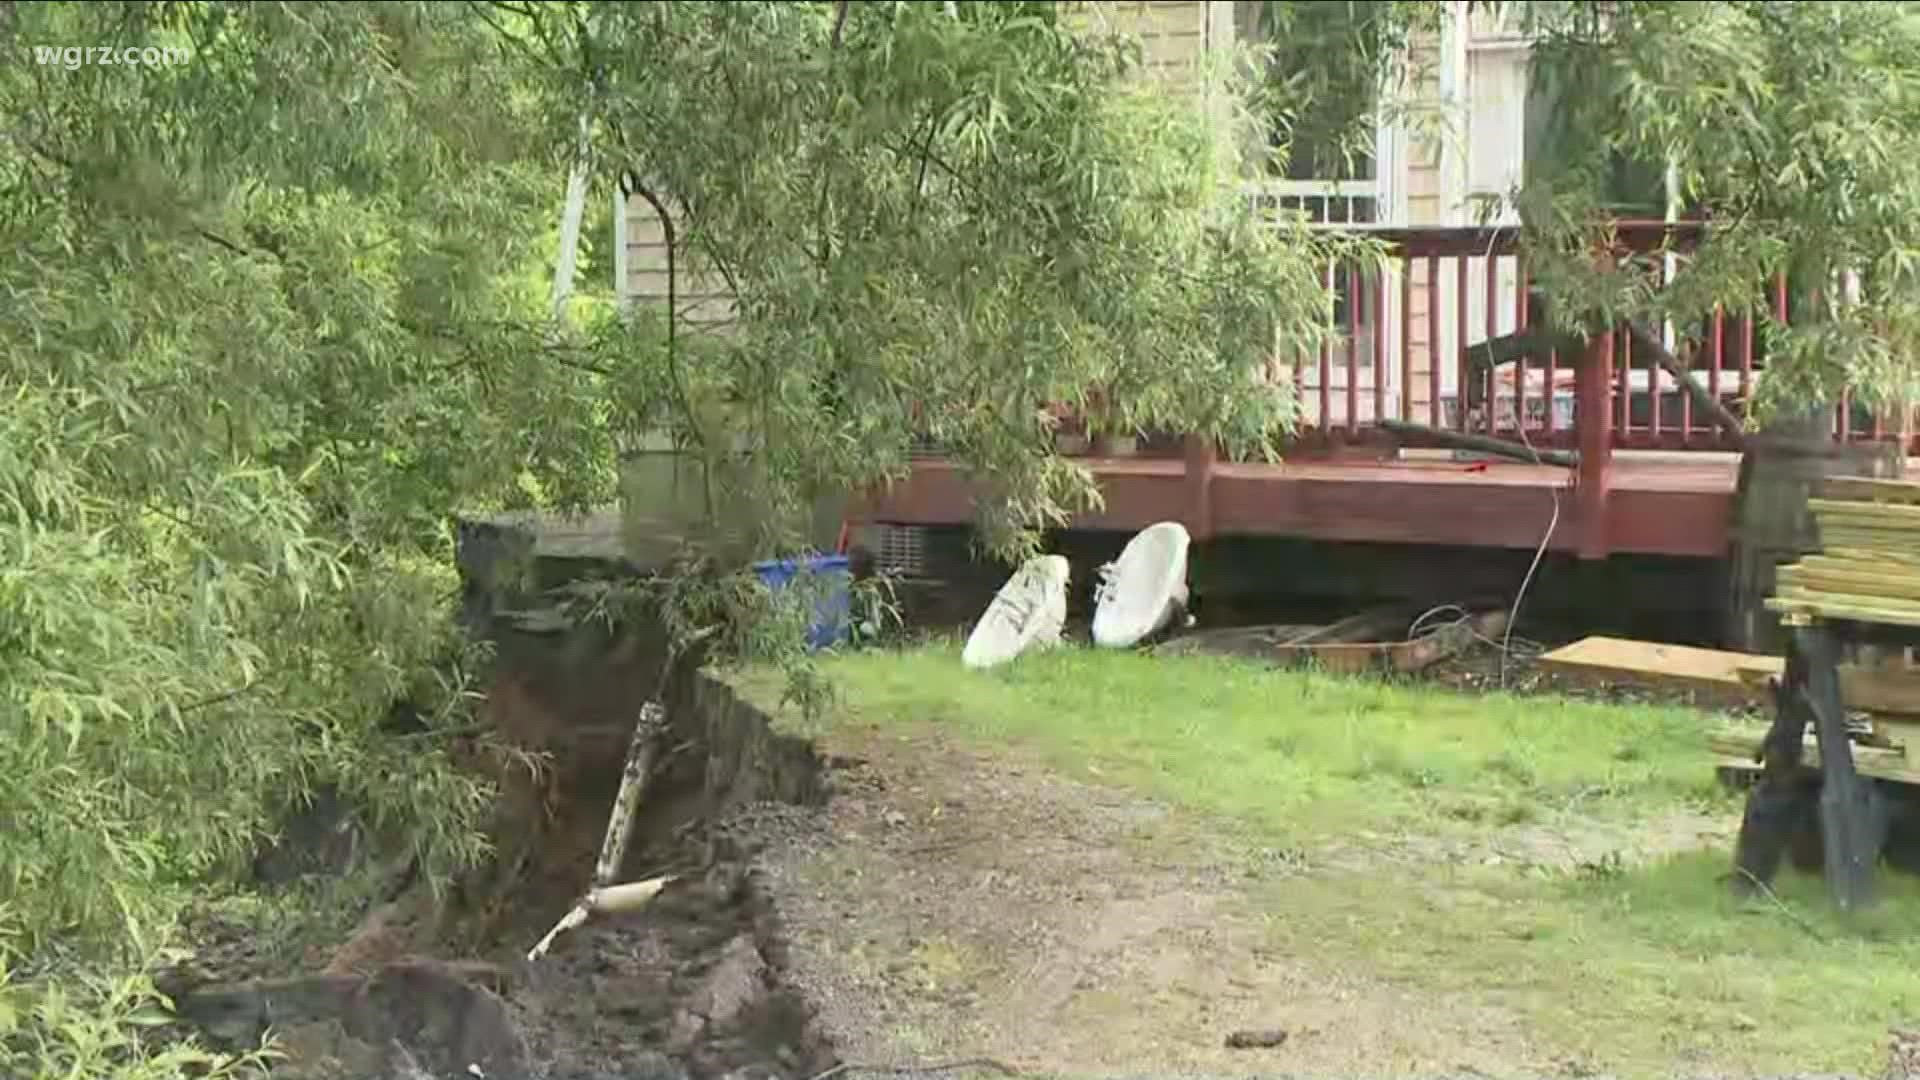 A landslide caused a 17 foot drop behind a home along Tonawanda Creek just before 4:30 PM yesterday. The landslide was said to be caused by erosion.